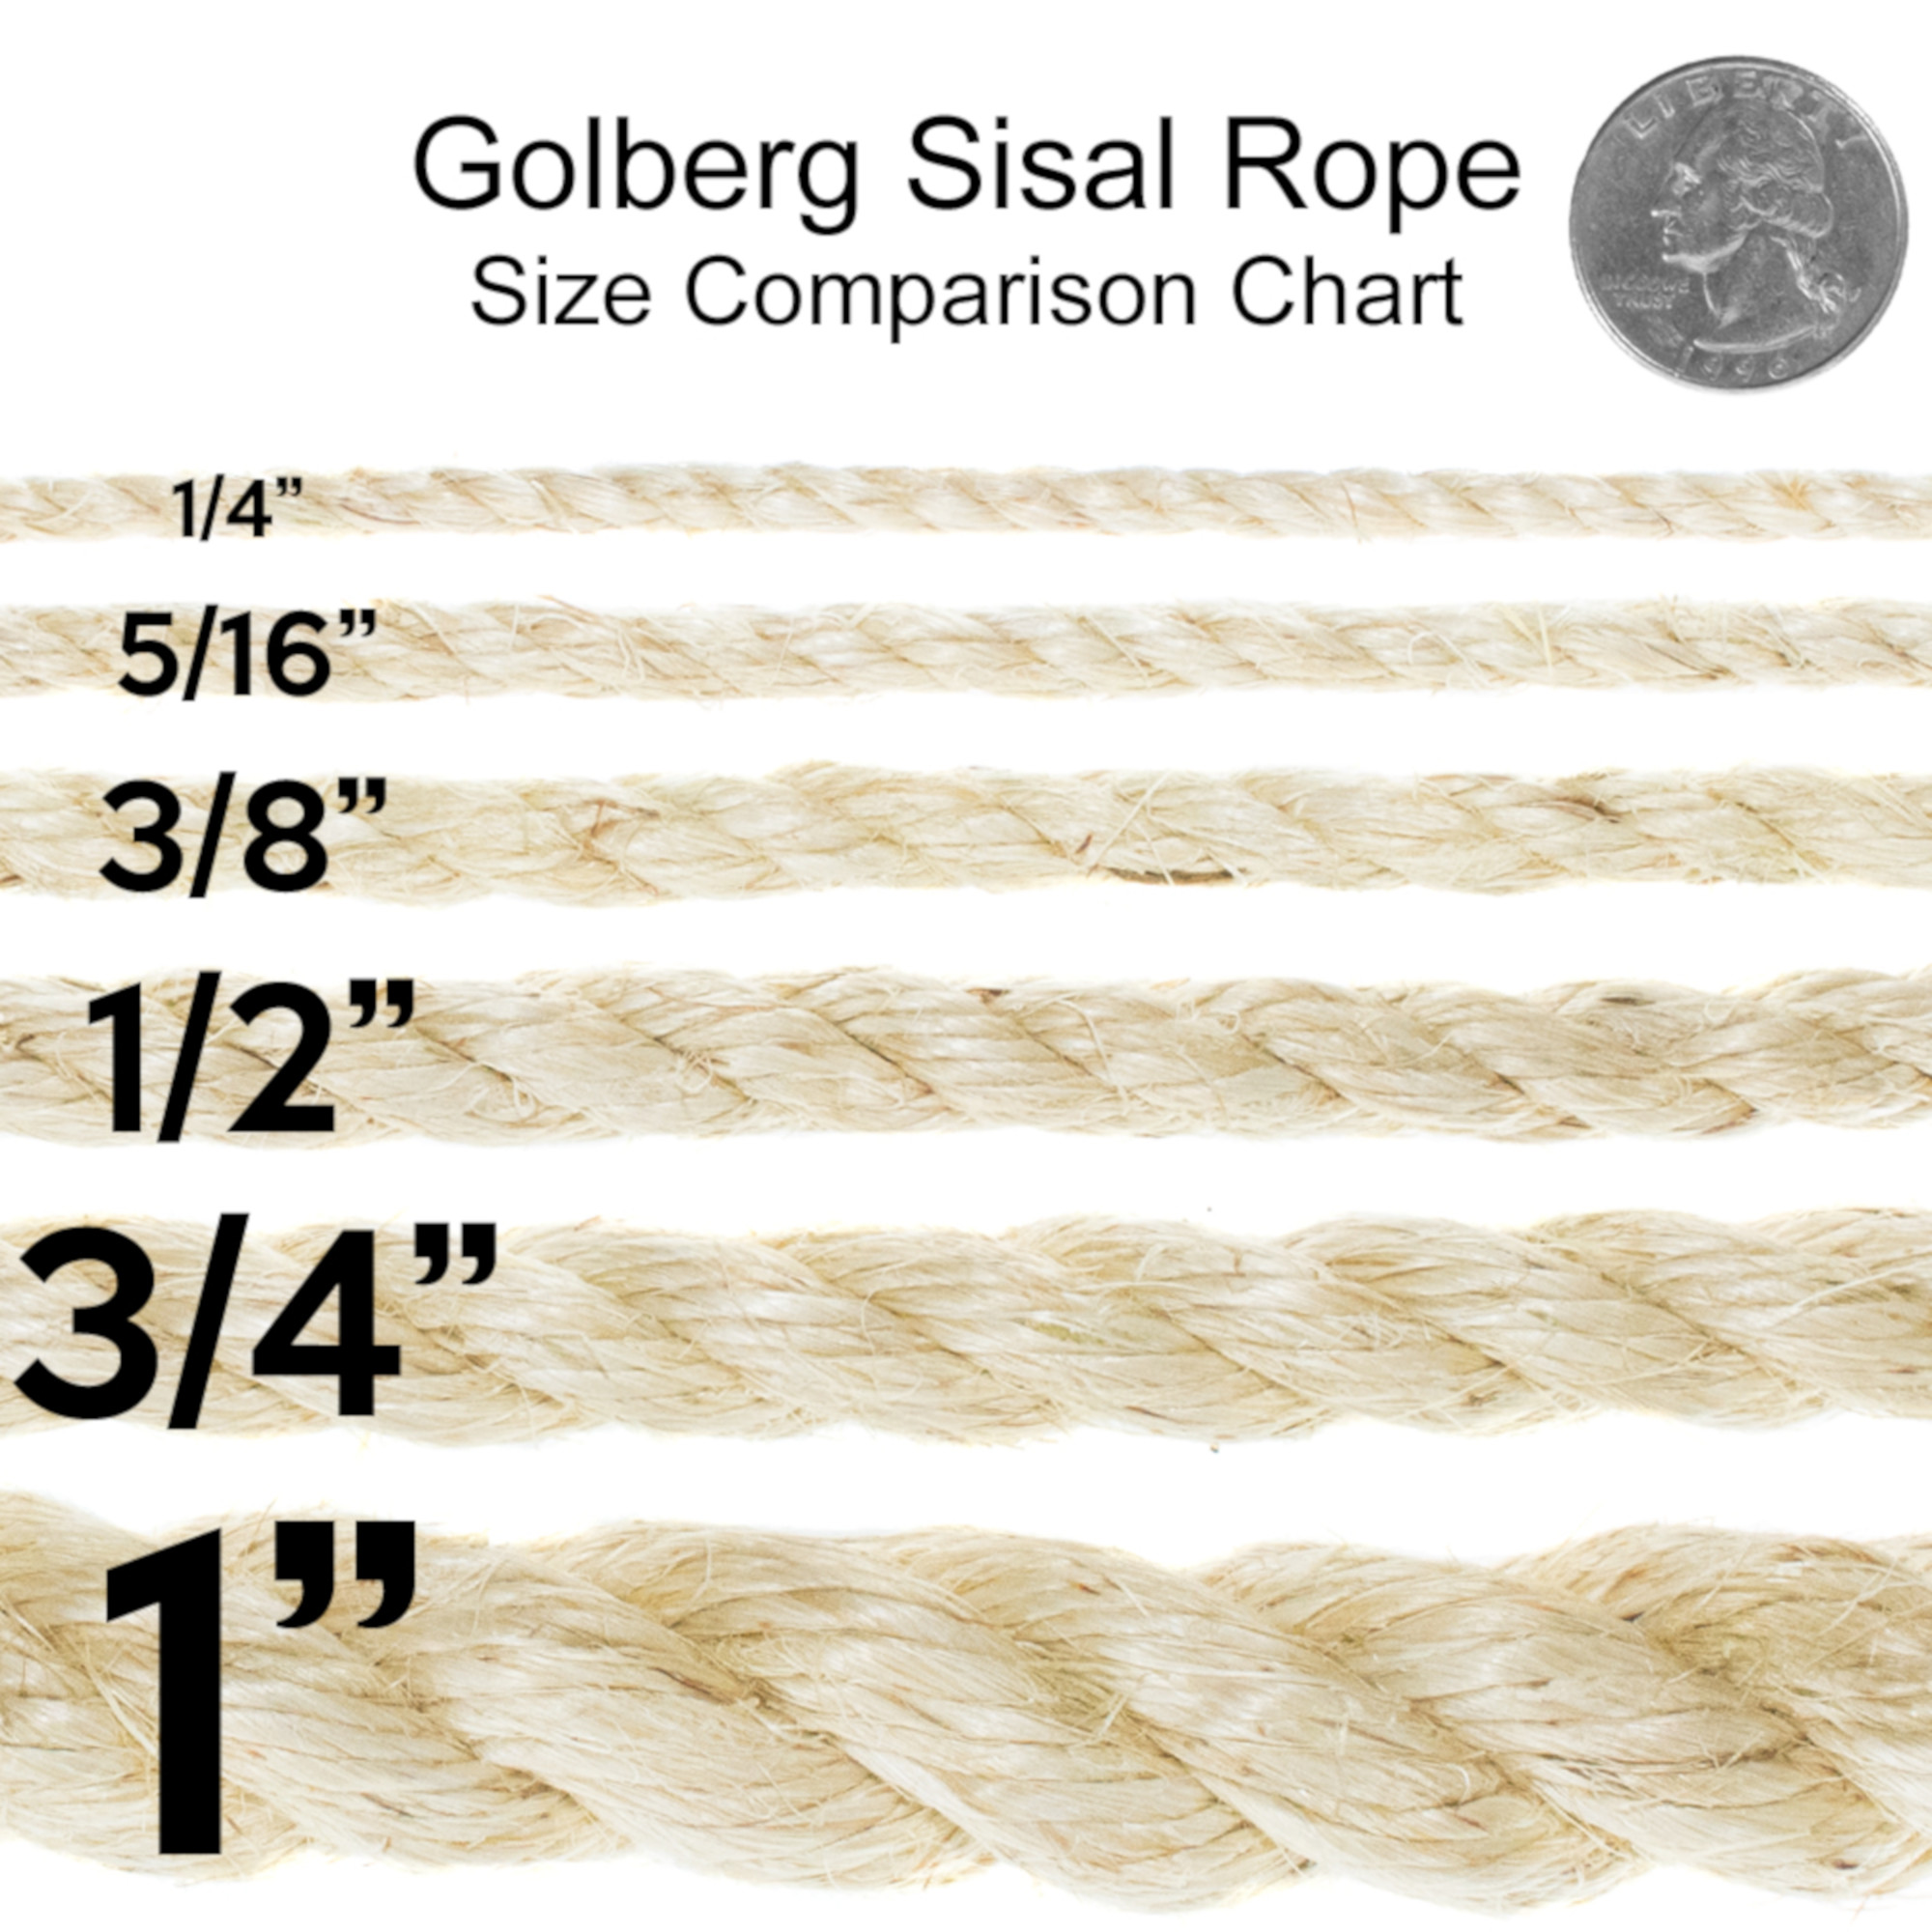 Golberg Twisted Sisal Rope Available in 1/4, 5/16, 3/8, 1/2, 3/4, and 1 ...